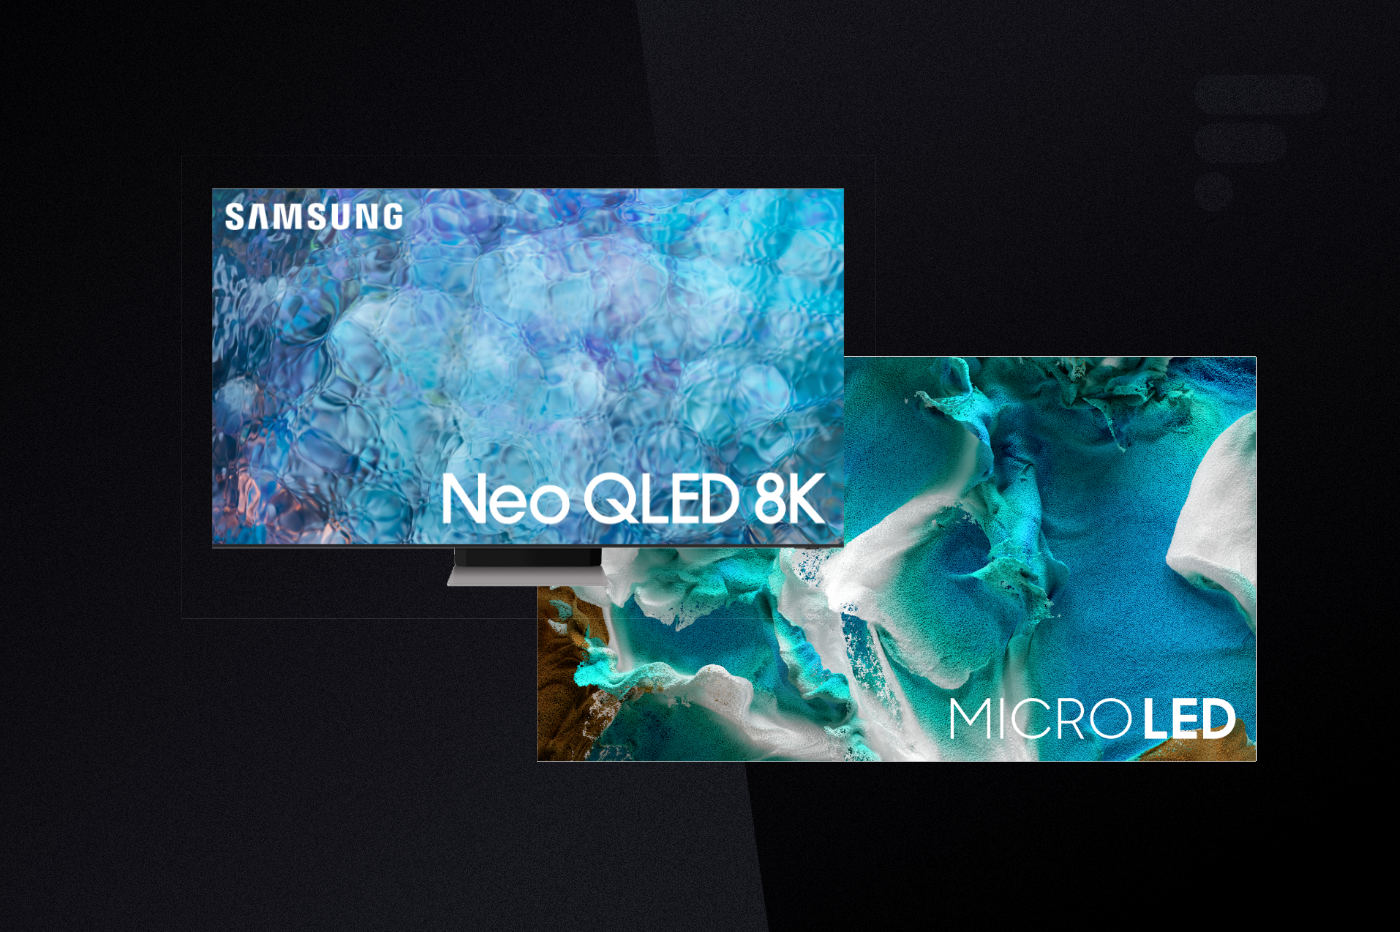 MicroLED, Mini LED, Neo QLED Samsung lance son offensive contre l'OLED